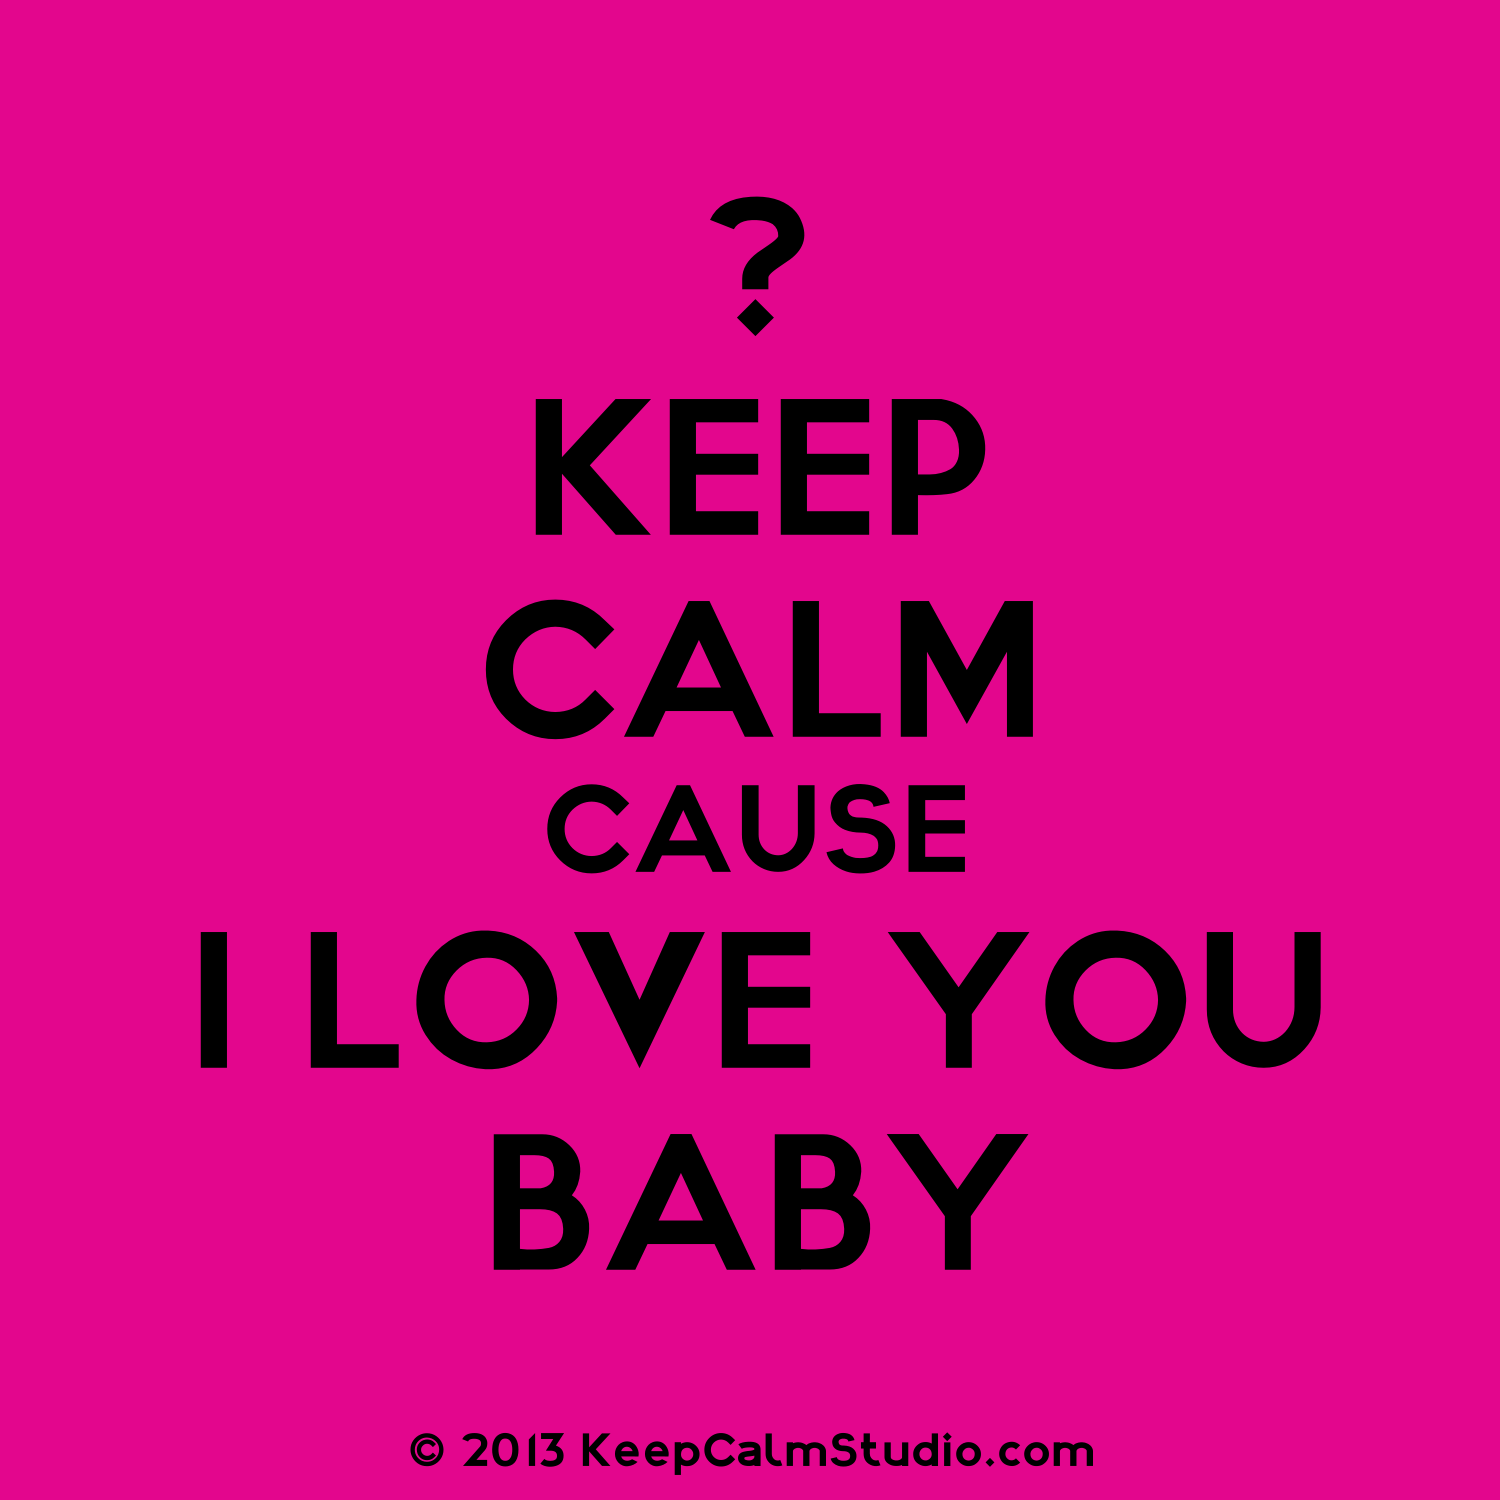 I Love You Baby Quotes. QuotesGram